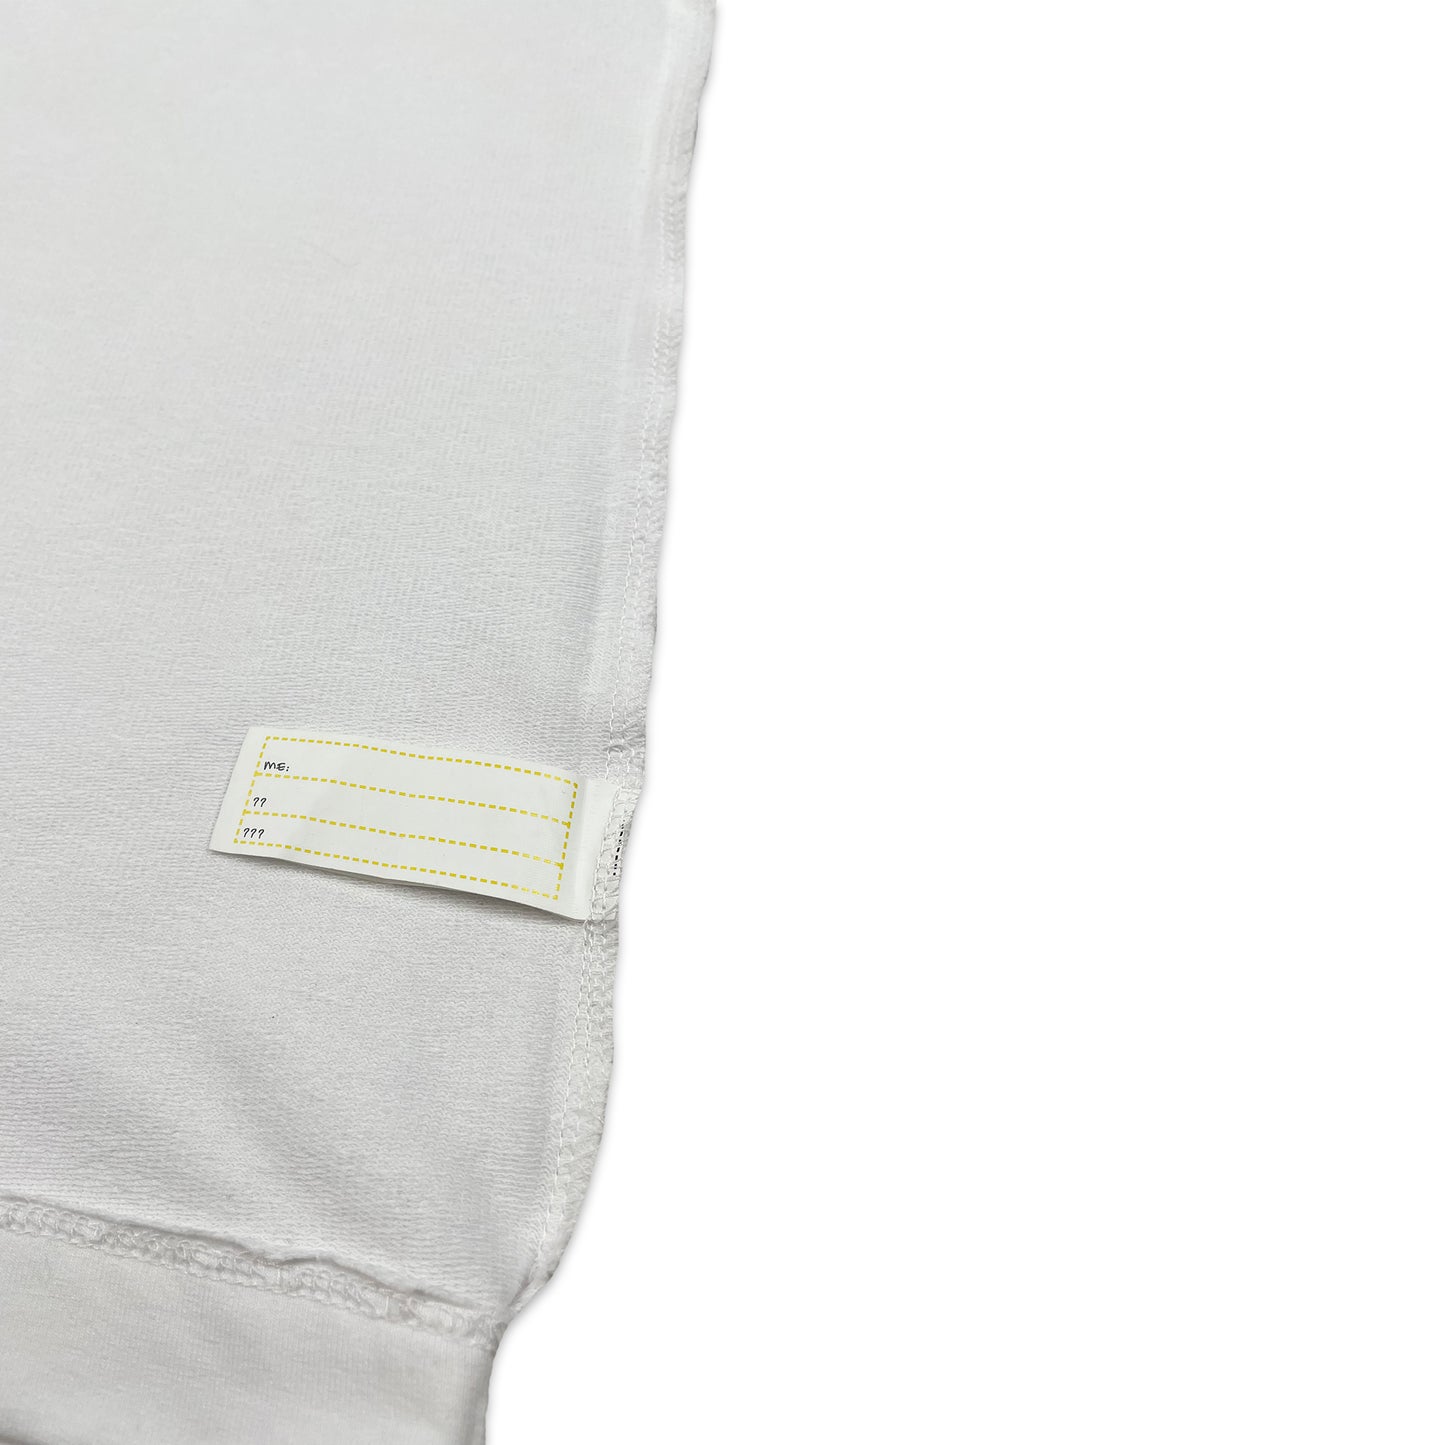 Embroidered Heavyweight T-Shirt | White